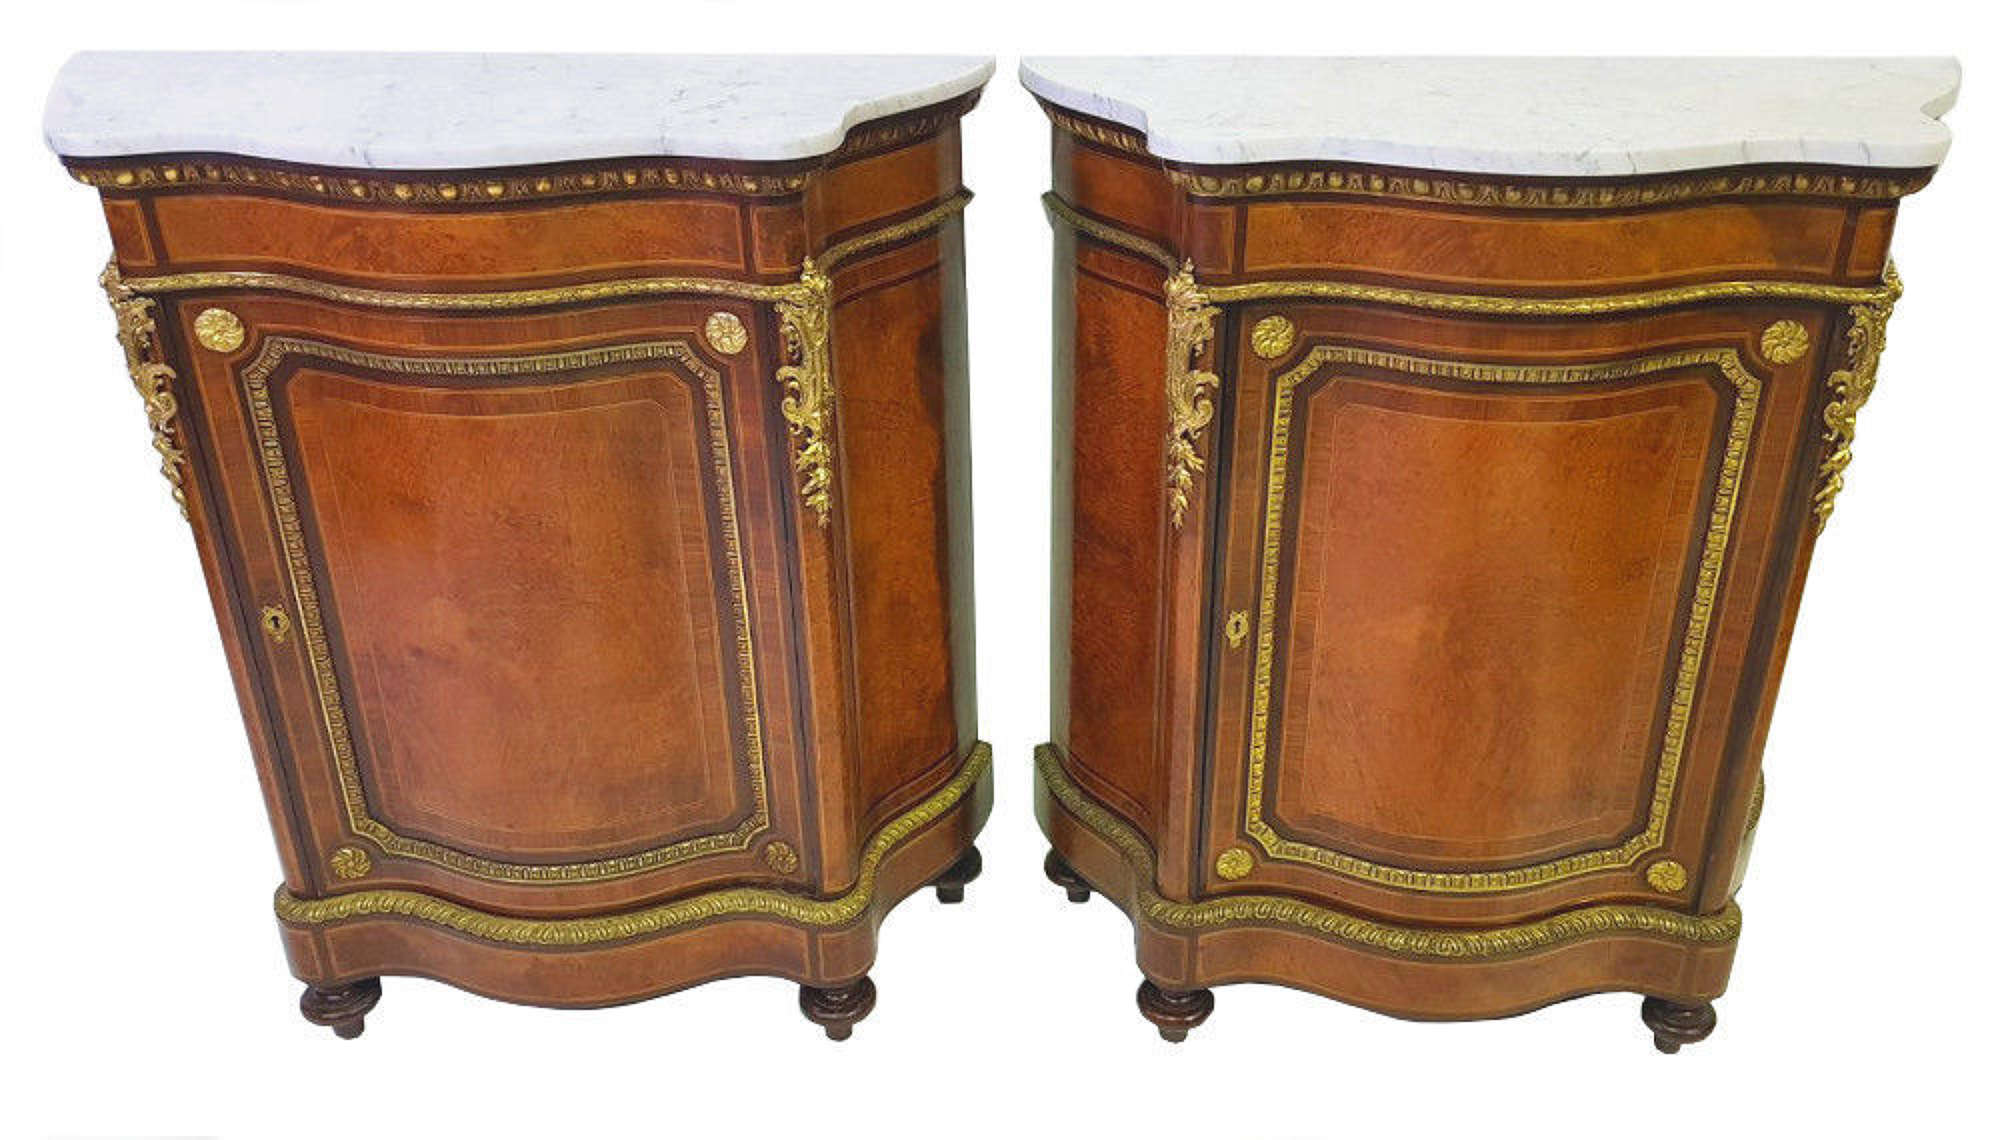 Fantastic Rare Pair Of 19th Century Serpentine Shaped Marble Top Pier